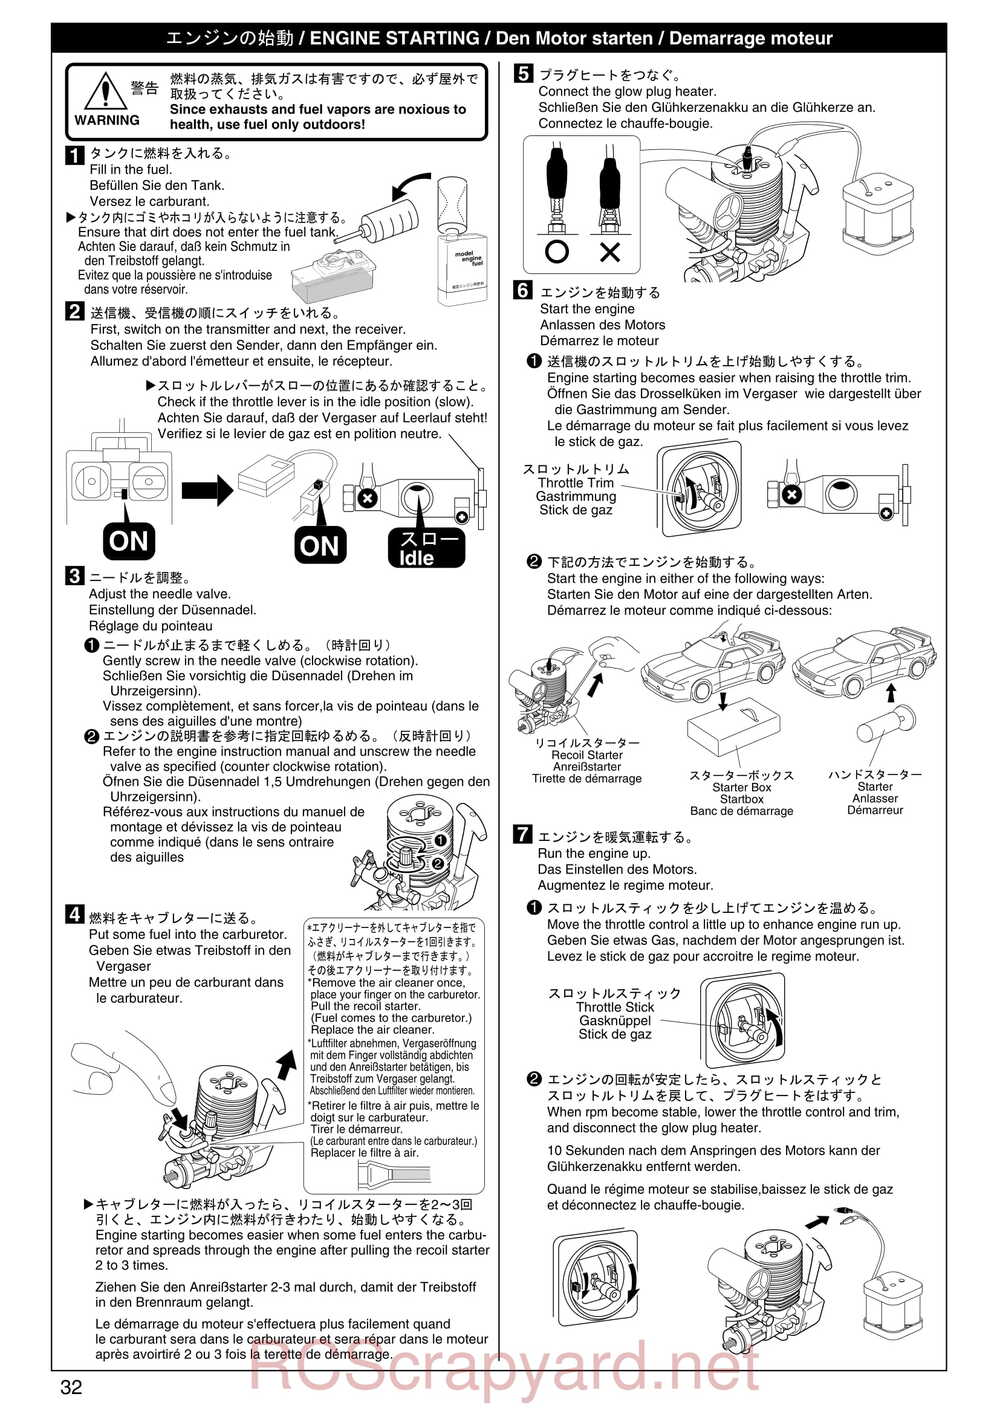 Kyosho - 31122 - V-One S2 - Manual - Page 32